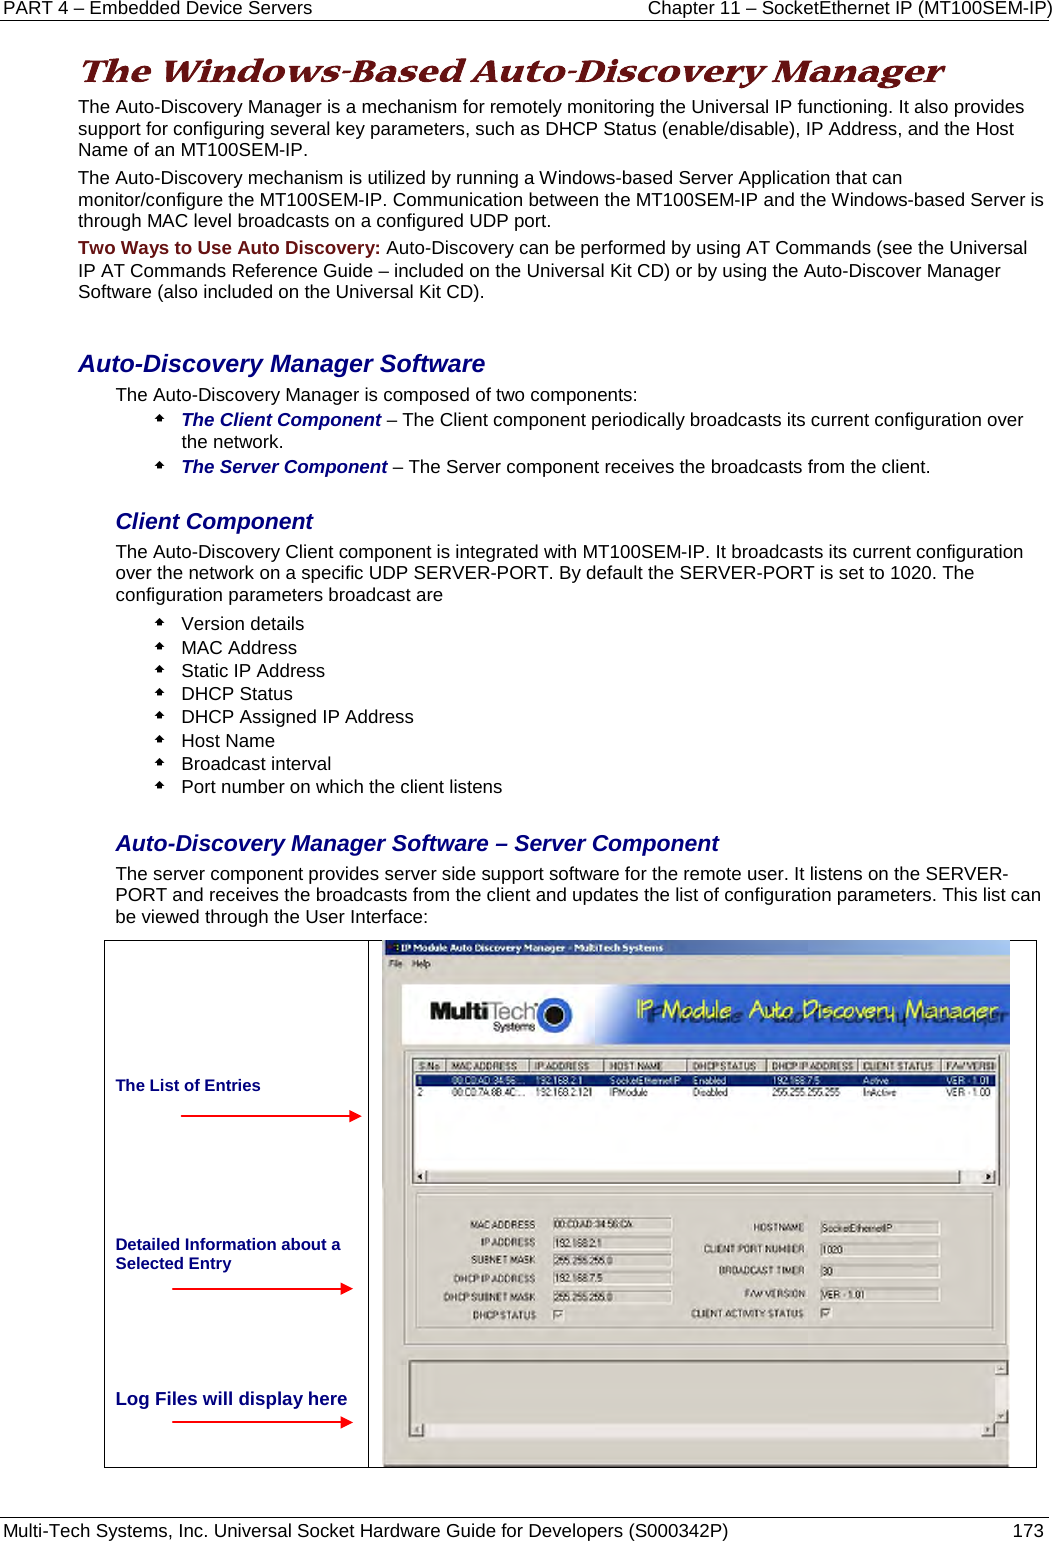 PART 4 – Embedded Device Servers Chapter 11 – SocketEthernet IP (MT100SEM-IP)  Multi-Tech Systems, Inc. Universal Socket Hardware Guide for Developers (S000342P)  173  The Windows-Based Auto-Discovery Manager  The Auto-Discovery Manager is a mechanism for remotely monitoring the Universal IP functioning. It also provides support for configuring several key parameters, such as DHCP Status (enable/disable), IP Address, and the Host Name of an MT100SEM-IP.  The Auto-Discovery mechanism is utilized by running a Windows-based Server Application that can monitor/configure the MT100SEM-IP. Communication between the MT100SEM-IP and the Windows-based Server is through MAC level broadcasts on a configured UDP port. Two Ways to Use Auto Discovery: Auto-Discovery can be performed by using AT Commands (see the Universal IP AT Commands Reference Guide – included on the Universal Kit CD) or by using the Auto-Discover Manager Software (also included on the Universal Kit CD).  Auto-Discovery Manager Software The Auto-Discovery Manager is composed of two components:  The Client Component – The Client component periodically broadcasts its current configuration over the network.  The Server Component – The Server component receives the broadcasts from the client.  Client Component The Auto-Discovery Client component is integrated with MT100SEM-IP. It broadcasts its current configuration over the network on a specific UDP SERVER-PORT. By default the SERVER-PORT is set to 1020. The configuration parameters broadcast are   Version details  MAC Address  Static IP Address  DHCP Status  DHCP Assigned IP Address  Host Name  Broadcast interval  Port number on which the client listens  Auto-Discovery Manager Software – Server Component The server component provides server side support software for the remote user. It listens on the SERVER-PORT and receives the broadcasts from the client and updates the list of configuration parameters. This list can be viewed through the User Interface:      The List of Entries     Detailed Information about a Selected Entry    Log Files will display here      